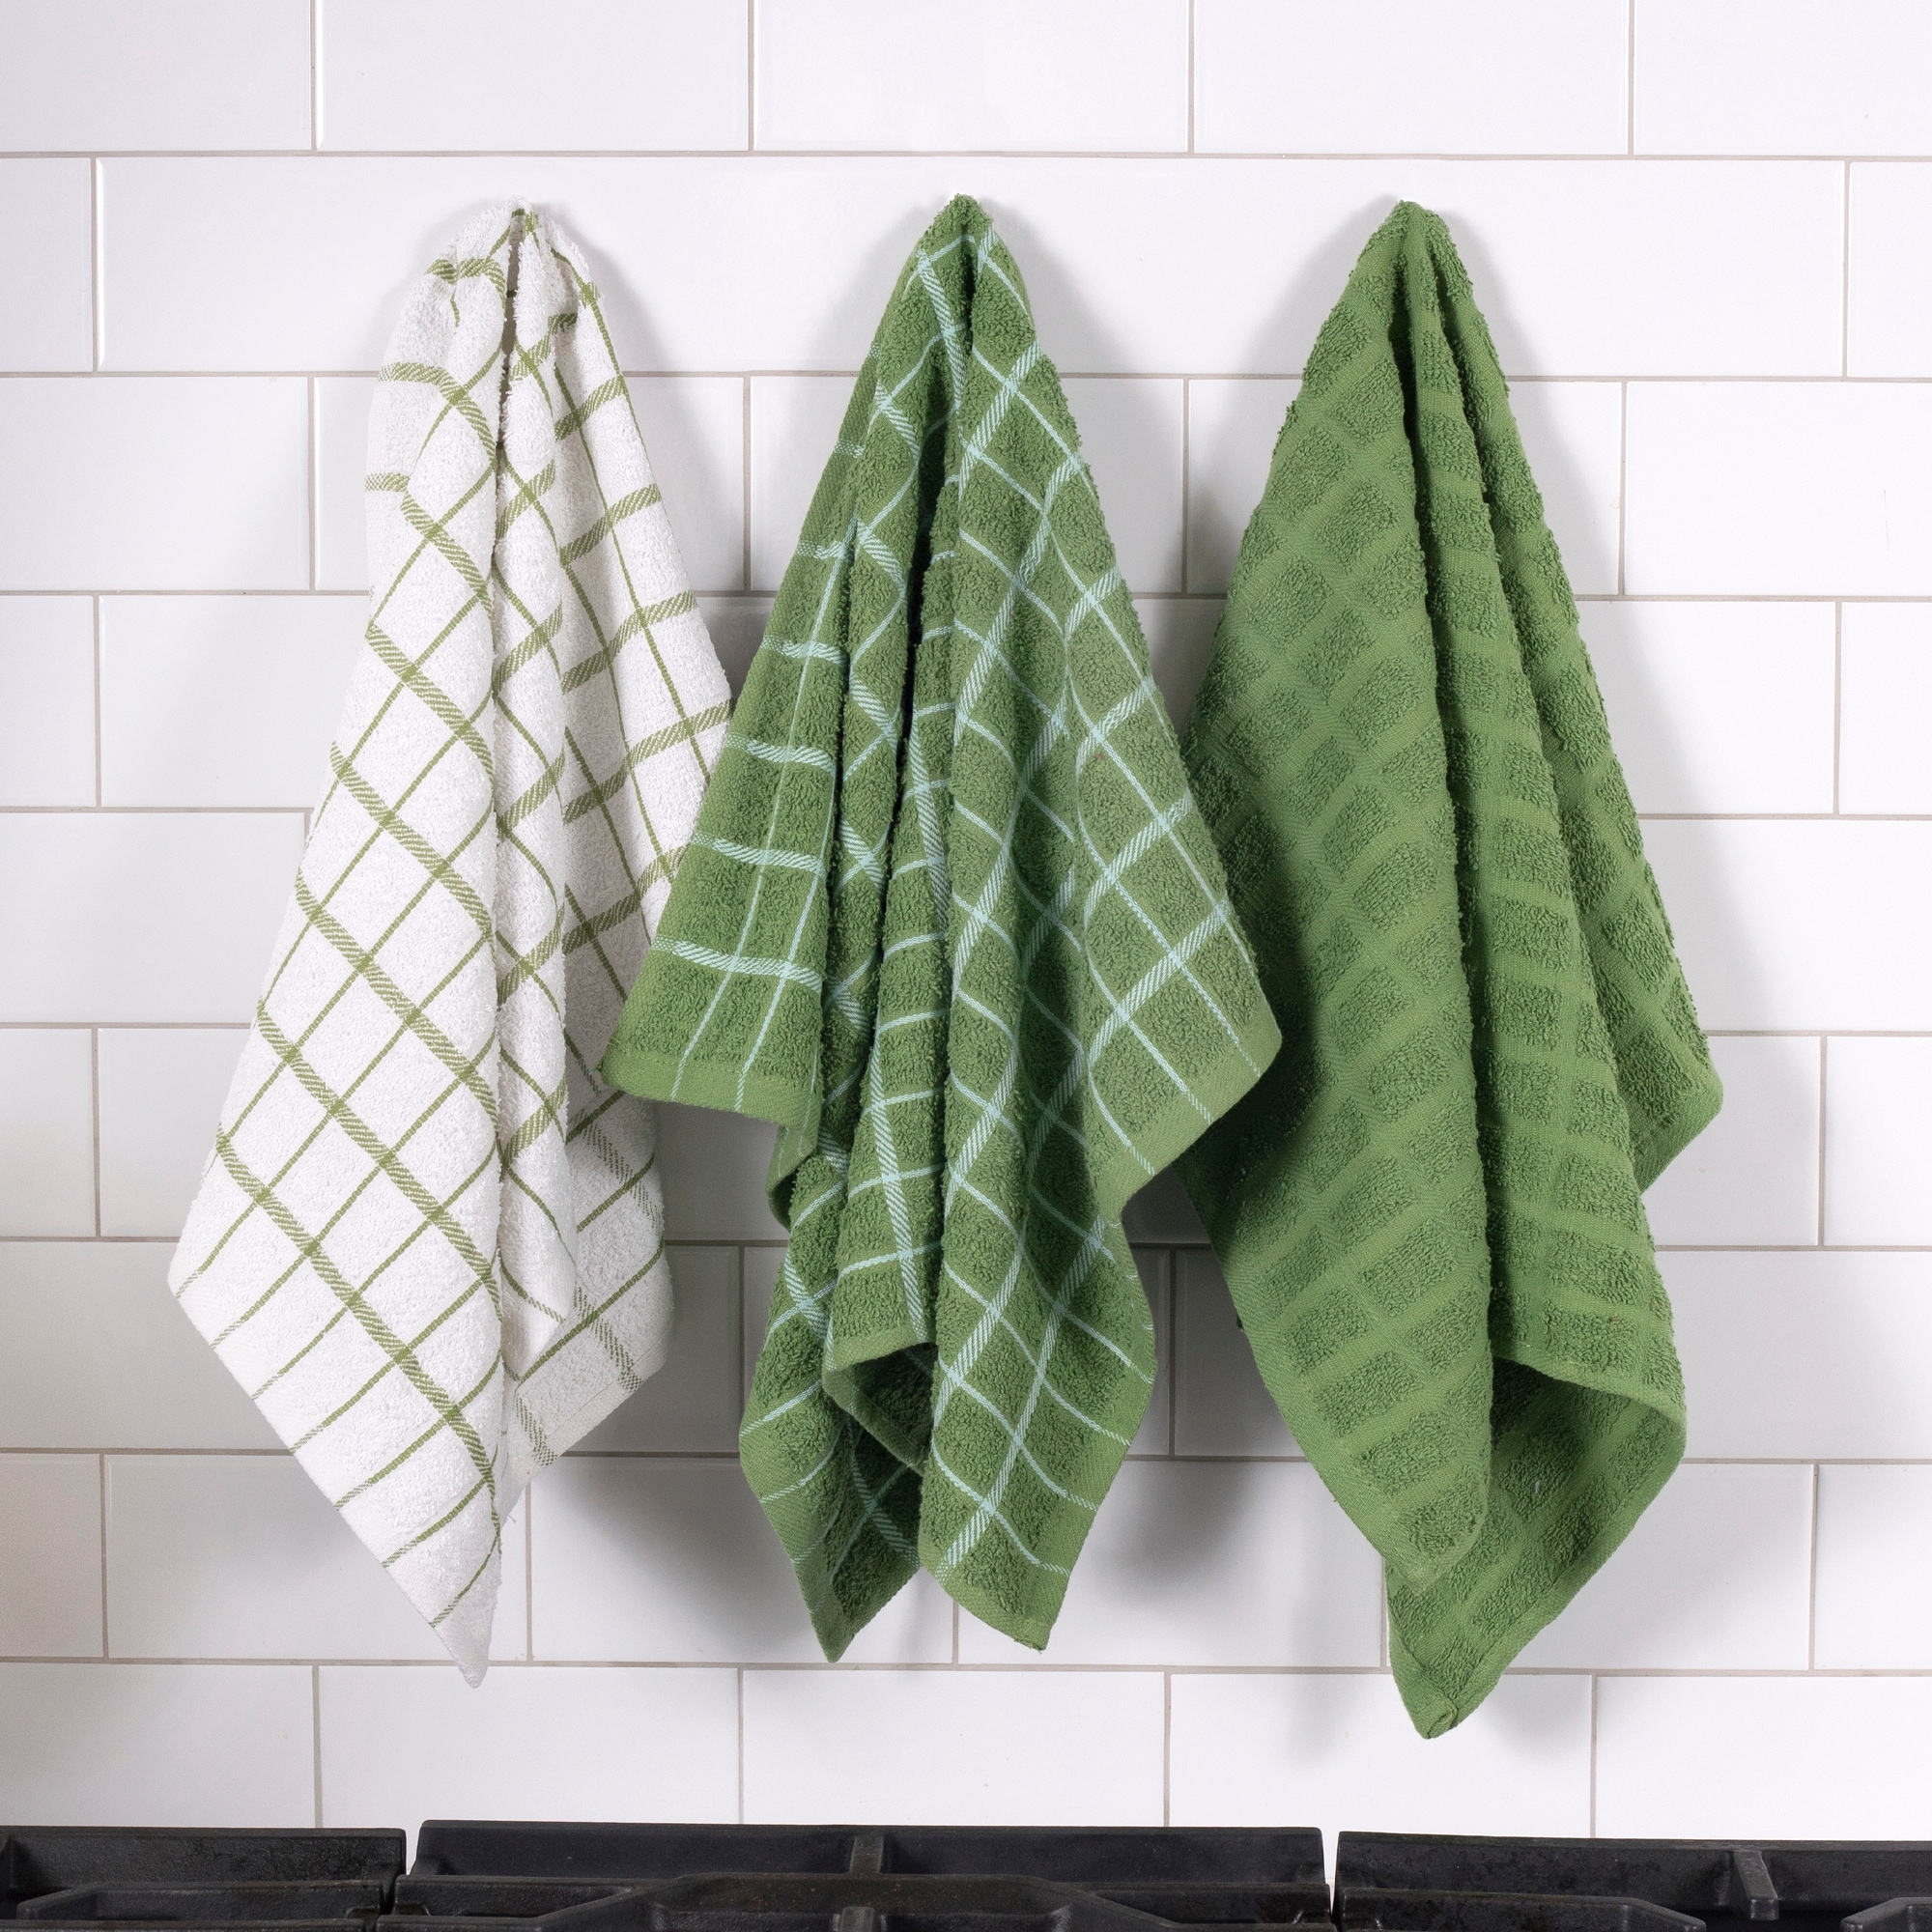 https://ak1.ostkcdn.com/images/products/is/images/direct/009b8302c31c97df56b533157bffb77f5b911bfd/RITZ-Terry-Check-Kitchen-Towel%2C-Set-of-3.jpg